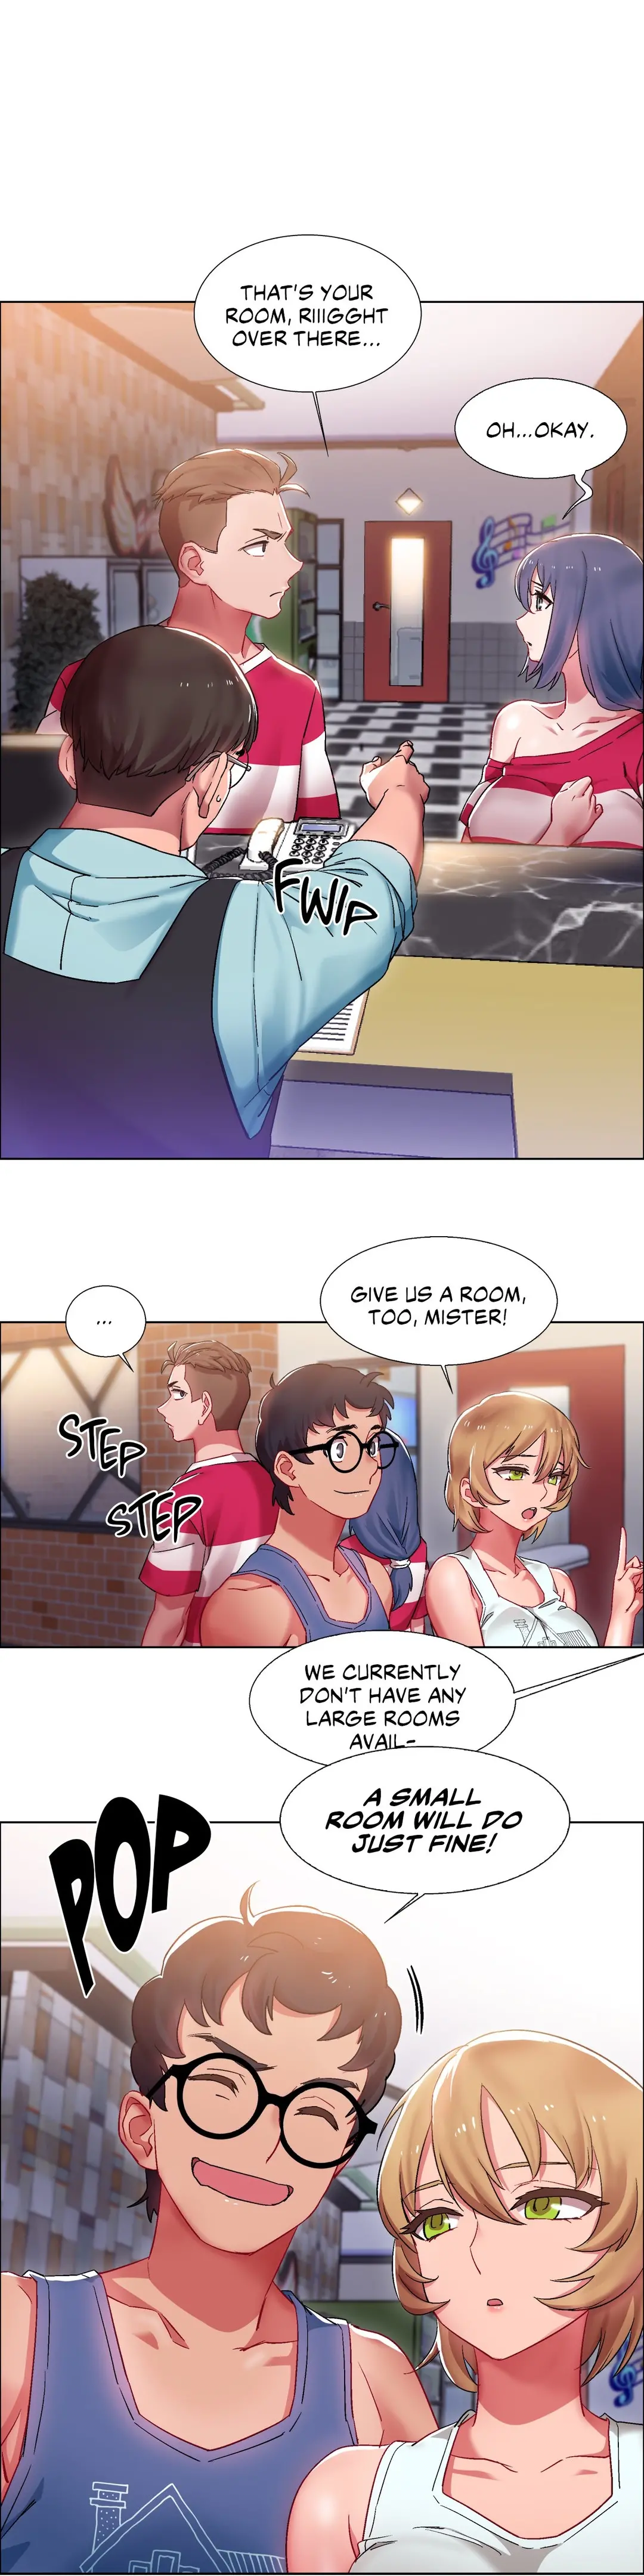 Rental Girls Chapter 17 - Page 4